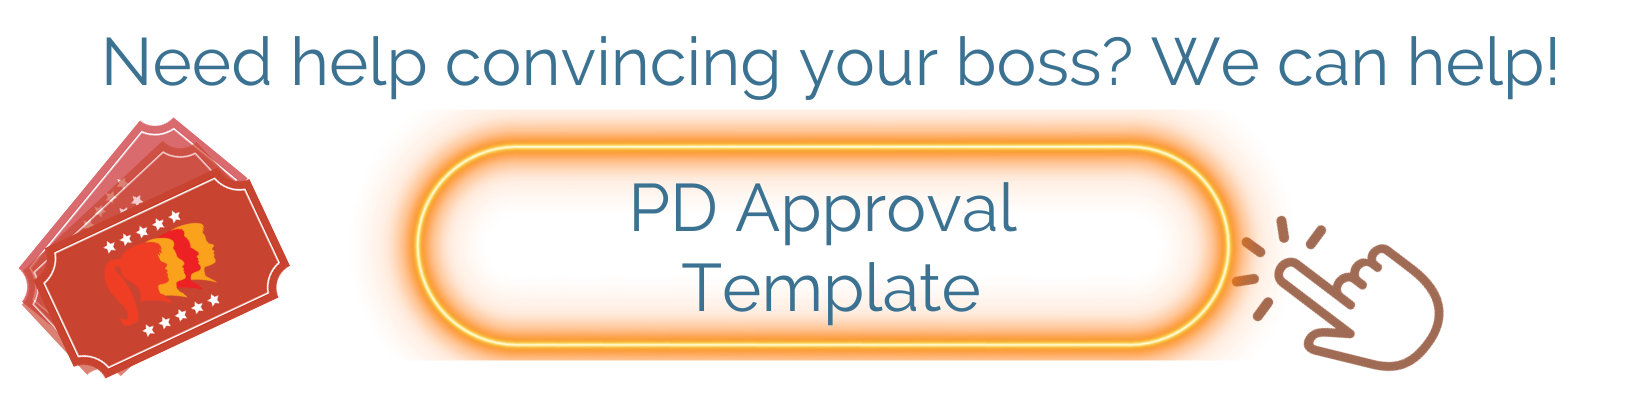 Text: Need help convincing your boss? We can help PD approval Template.